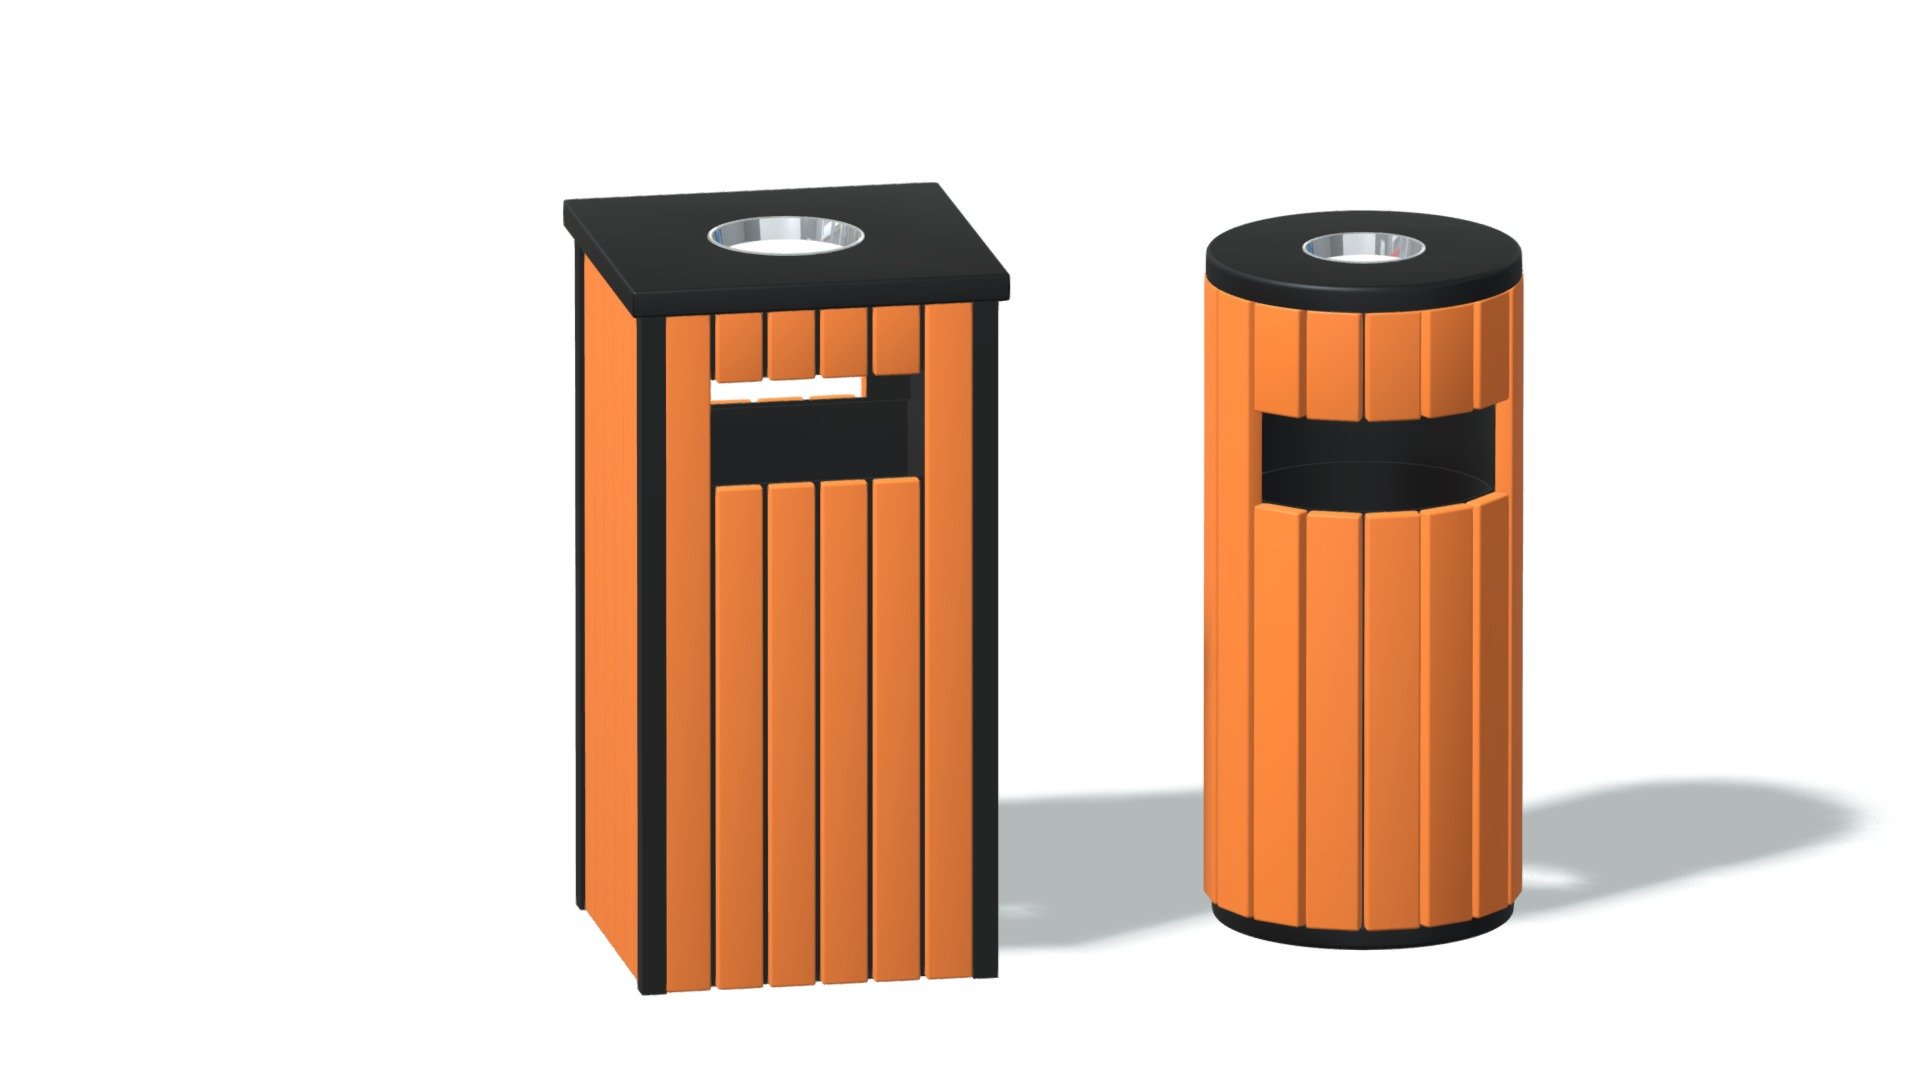 -Wooden Trash Can Collection.

-This file contains 36 objects.

-Verts : 11,326 Faces : 23,516.

-This product was created in Blender 3.0.

-Formats: blend, fbx, obj, c4d, dae, abc, glb, unitypackage.

-We hope you enjoy this model.

-Thank you 3d model